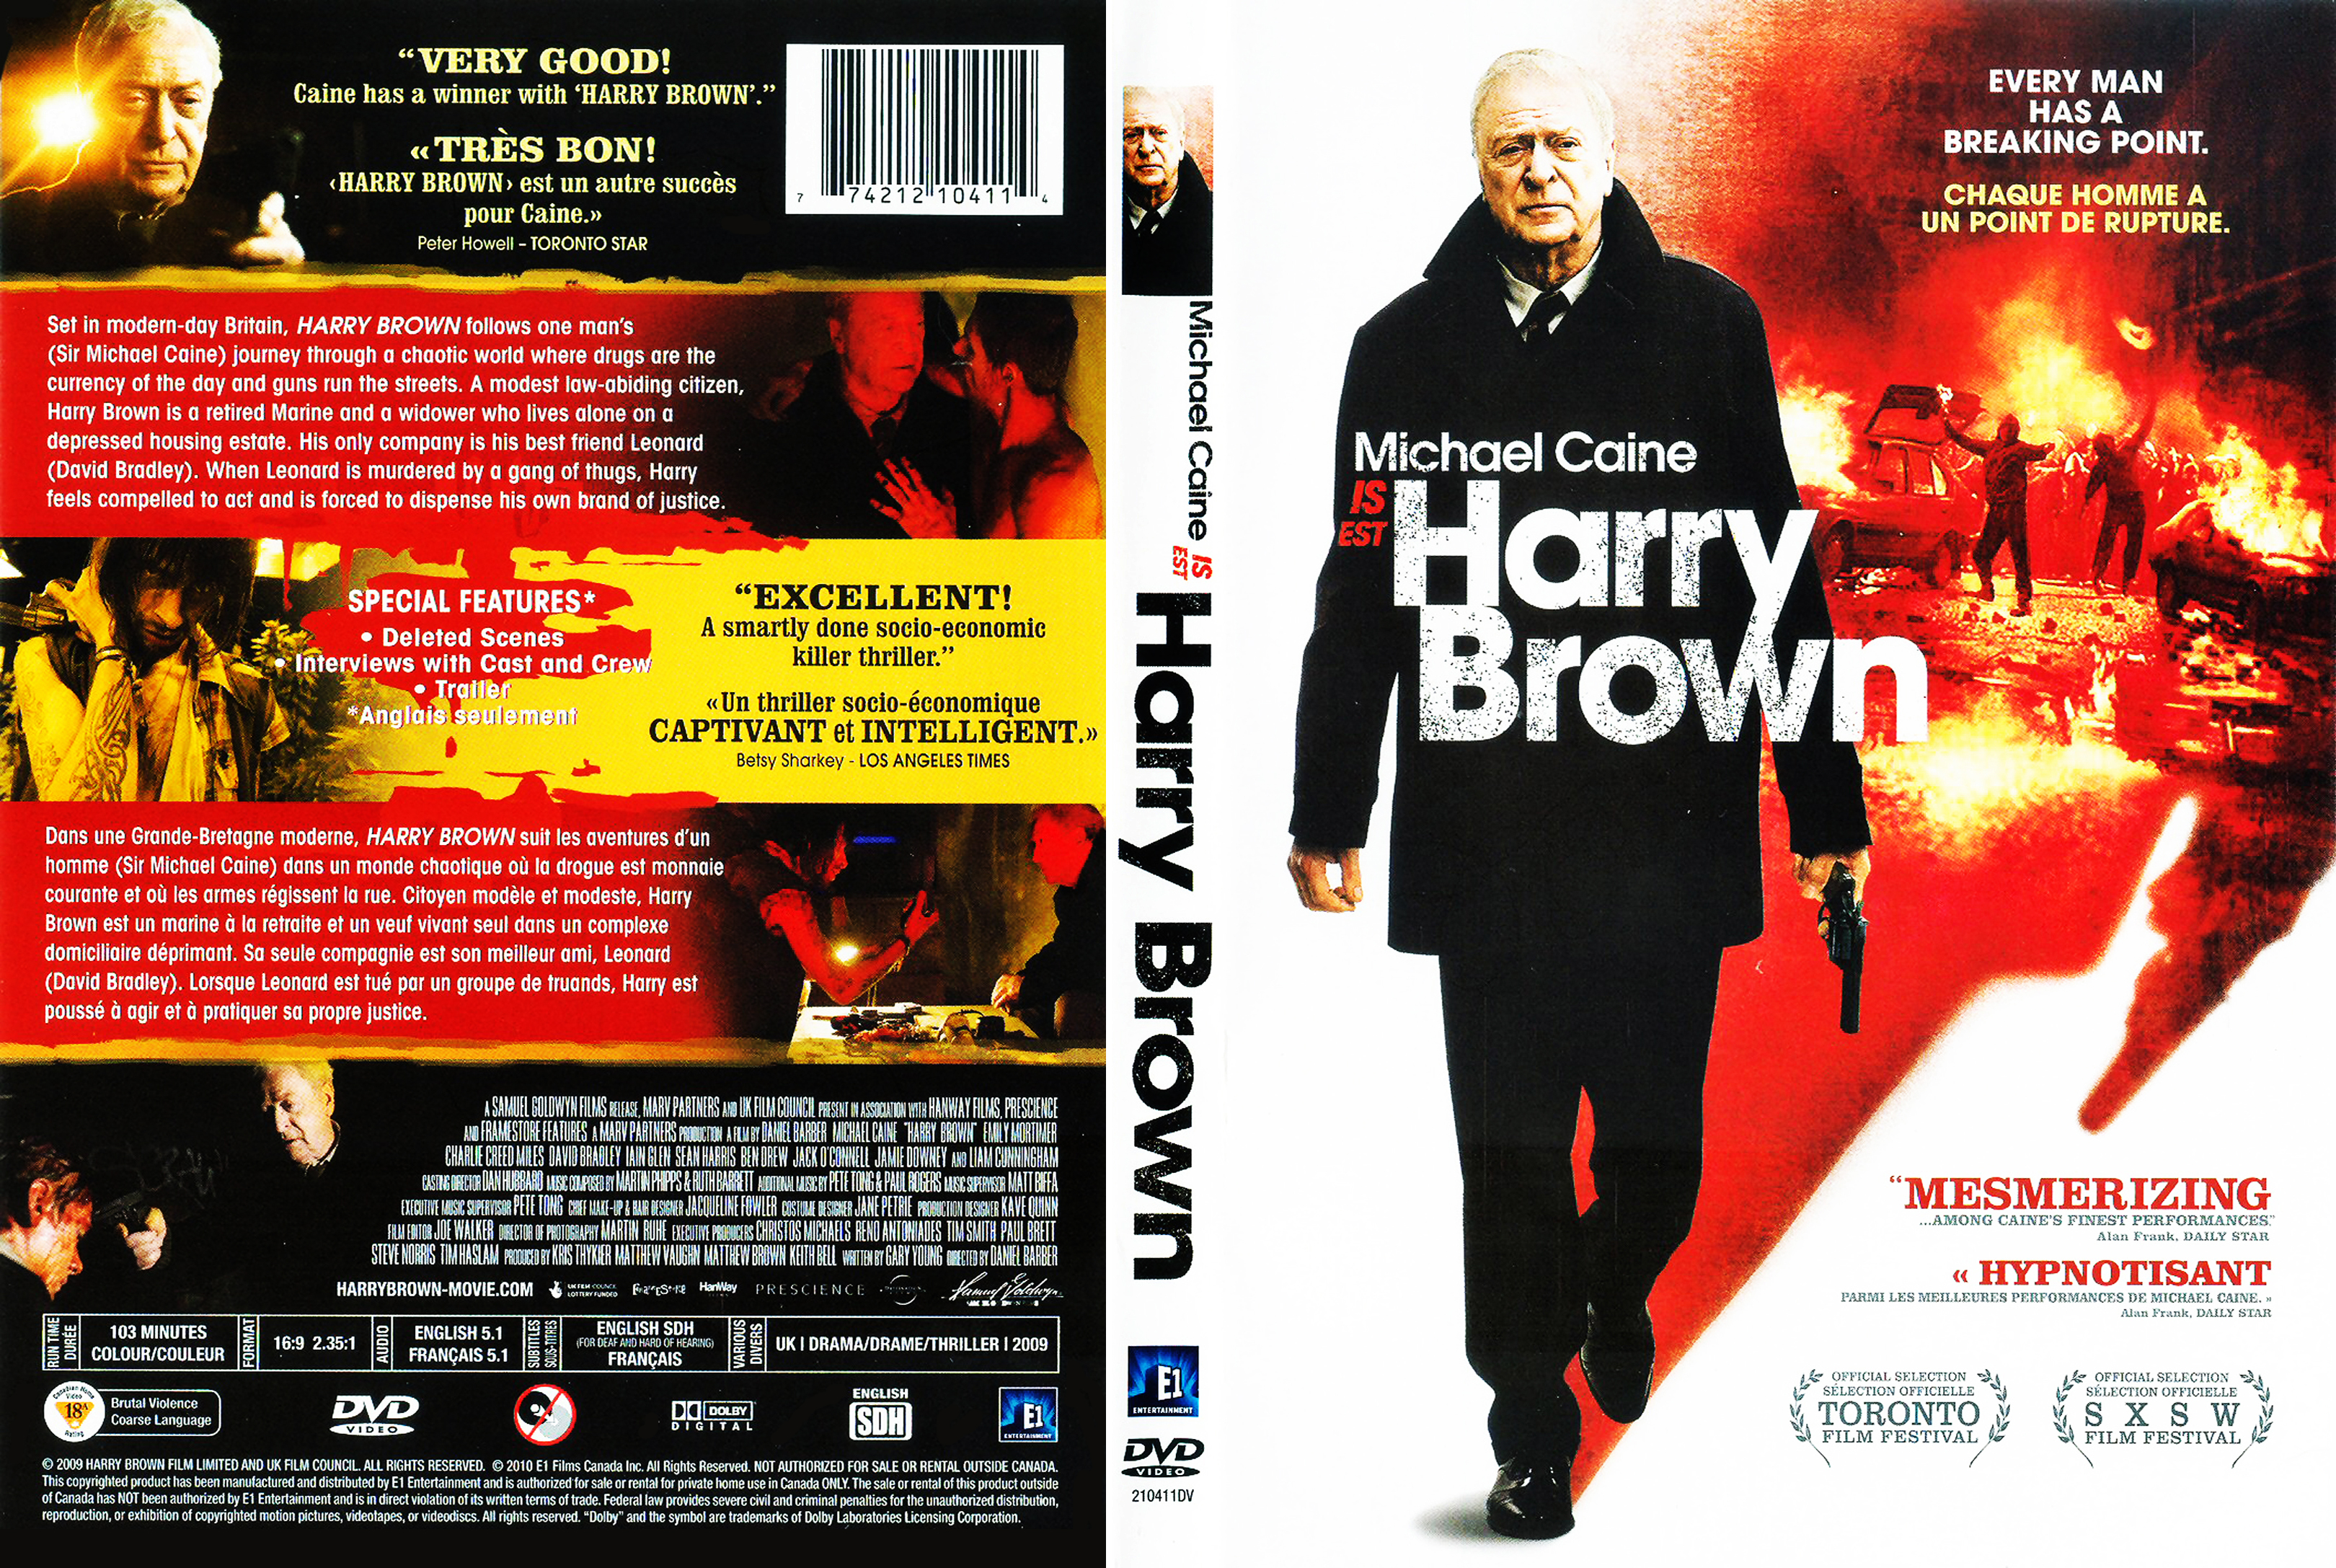 Jaquette DVD Harry Brown (Canadienne)